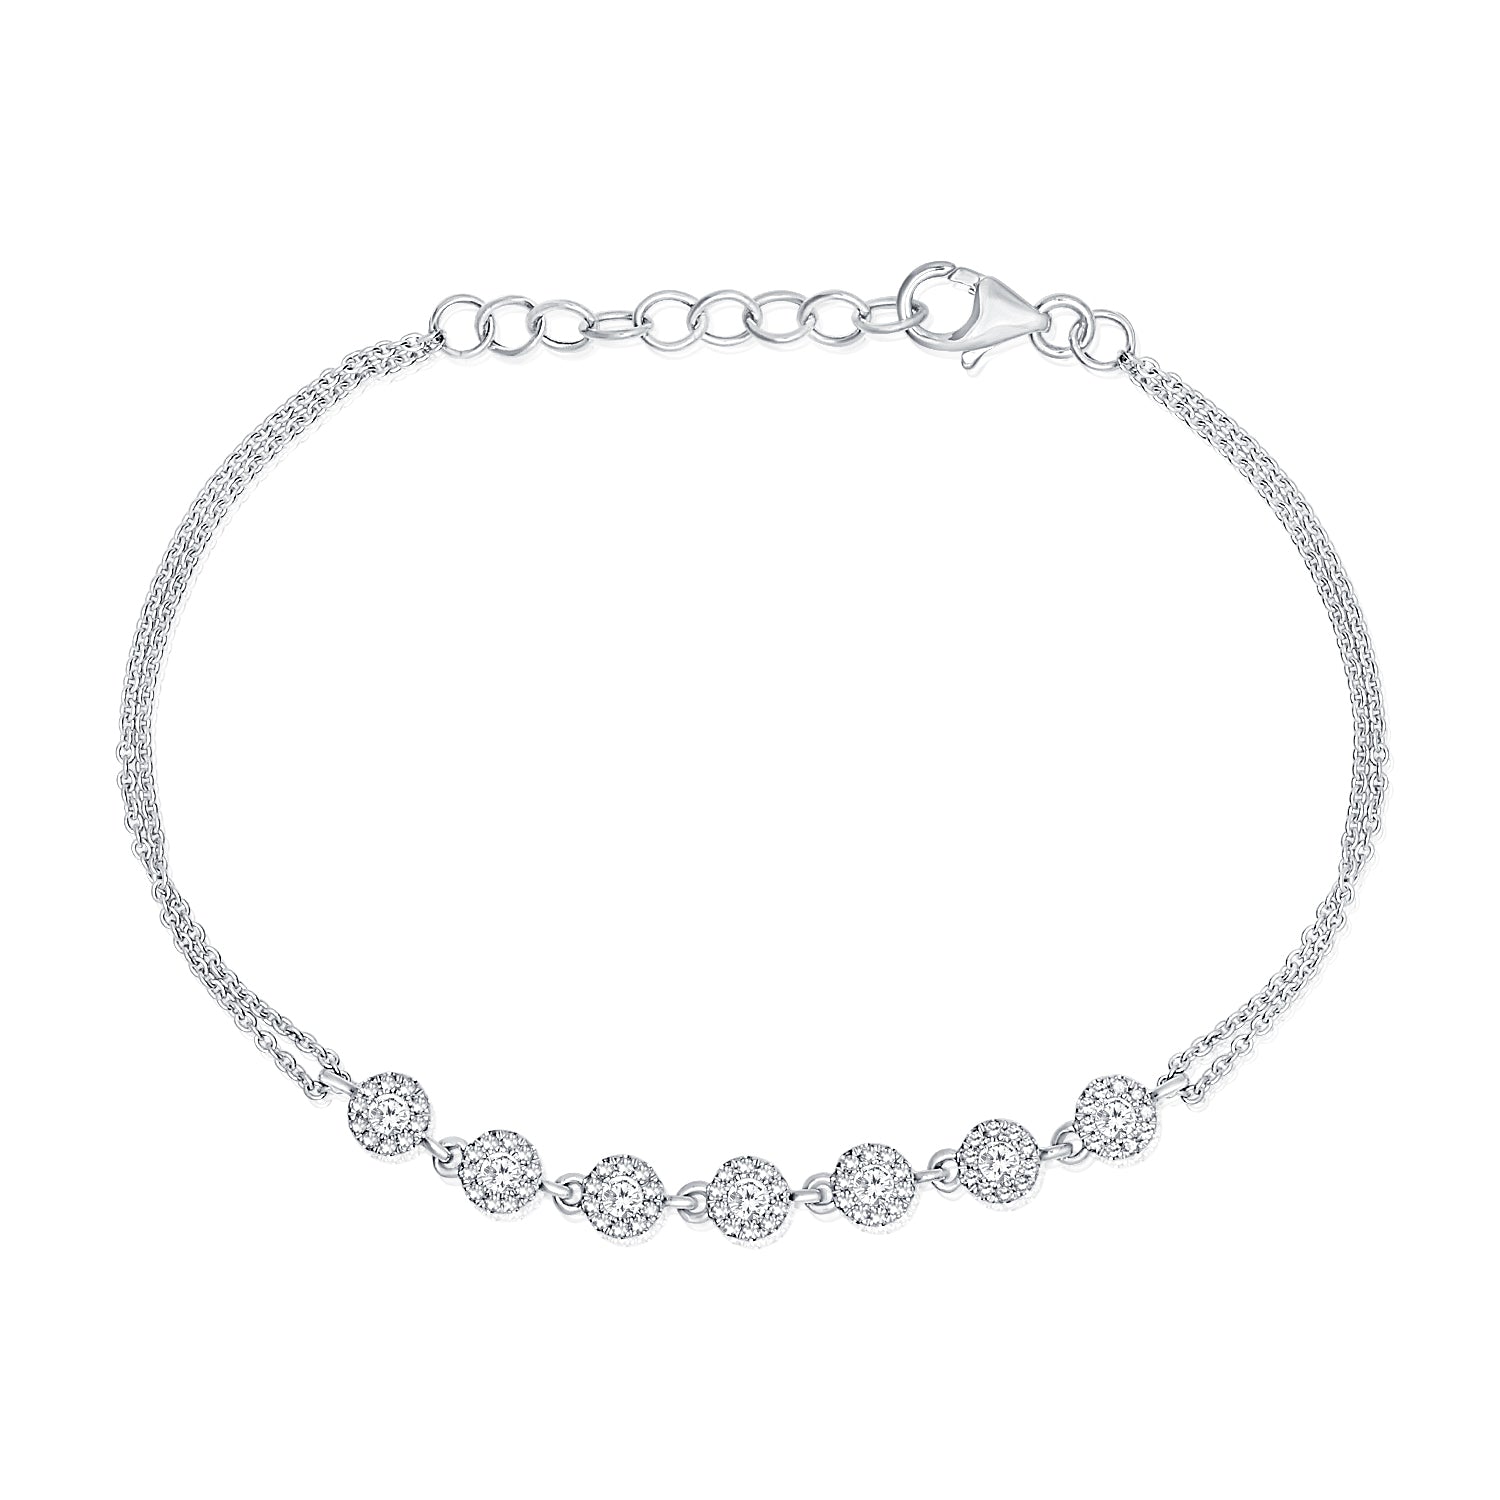 Diamond Halo Cable Chain Bracelet - 14K white gold weighing 3.05 grams - 7 round diamonds totaling 0.28 carats - 70 round diamonds totaling 0.23 carats